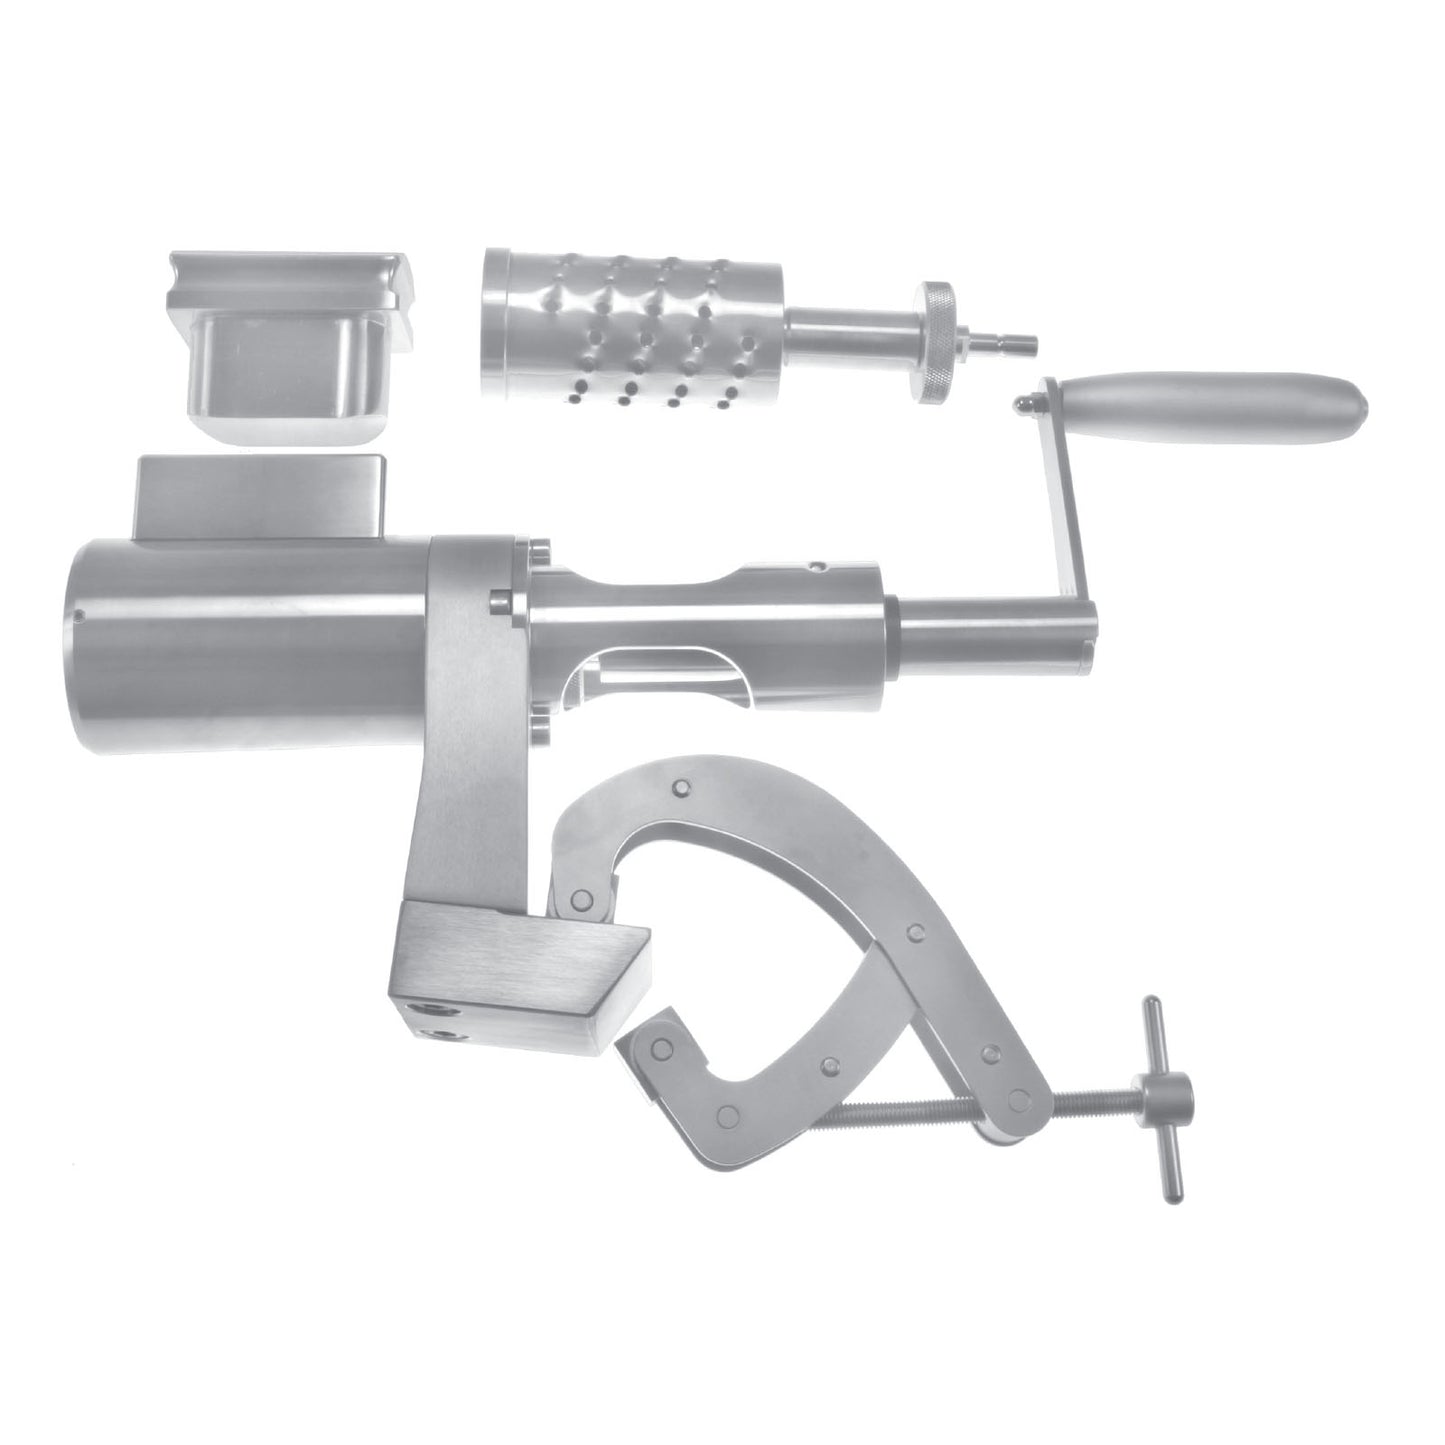 Bone Mill and Table Clamp complete set